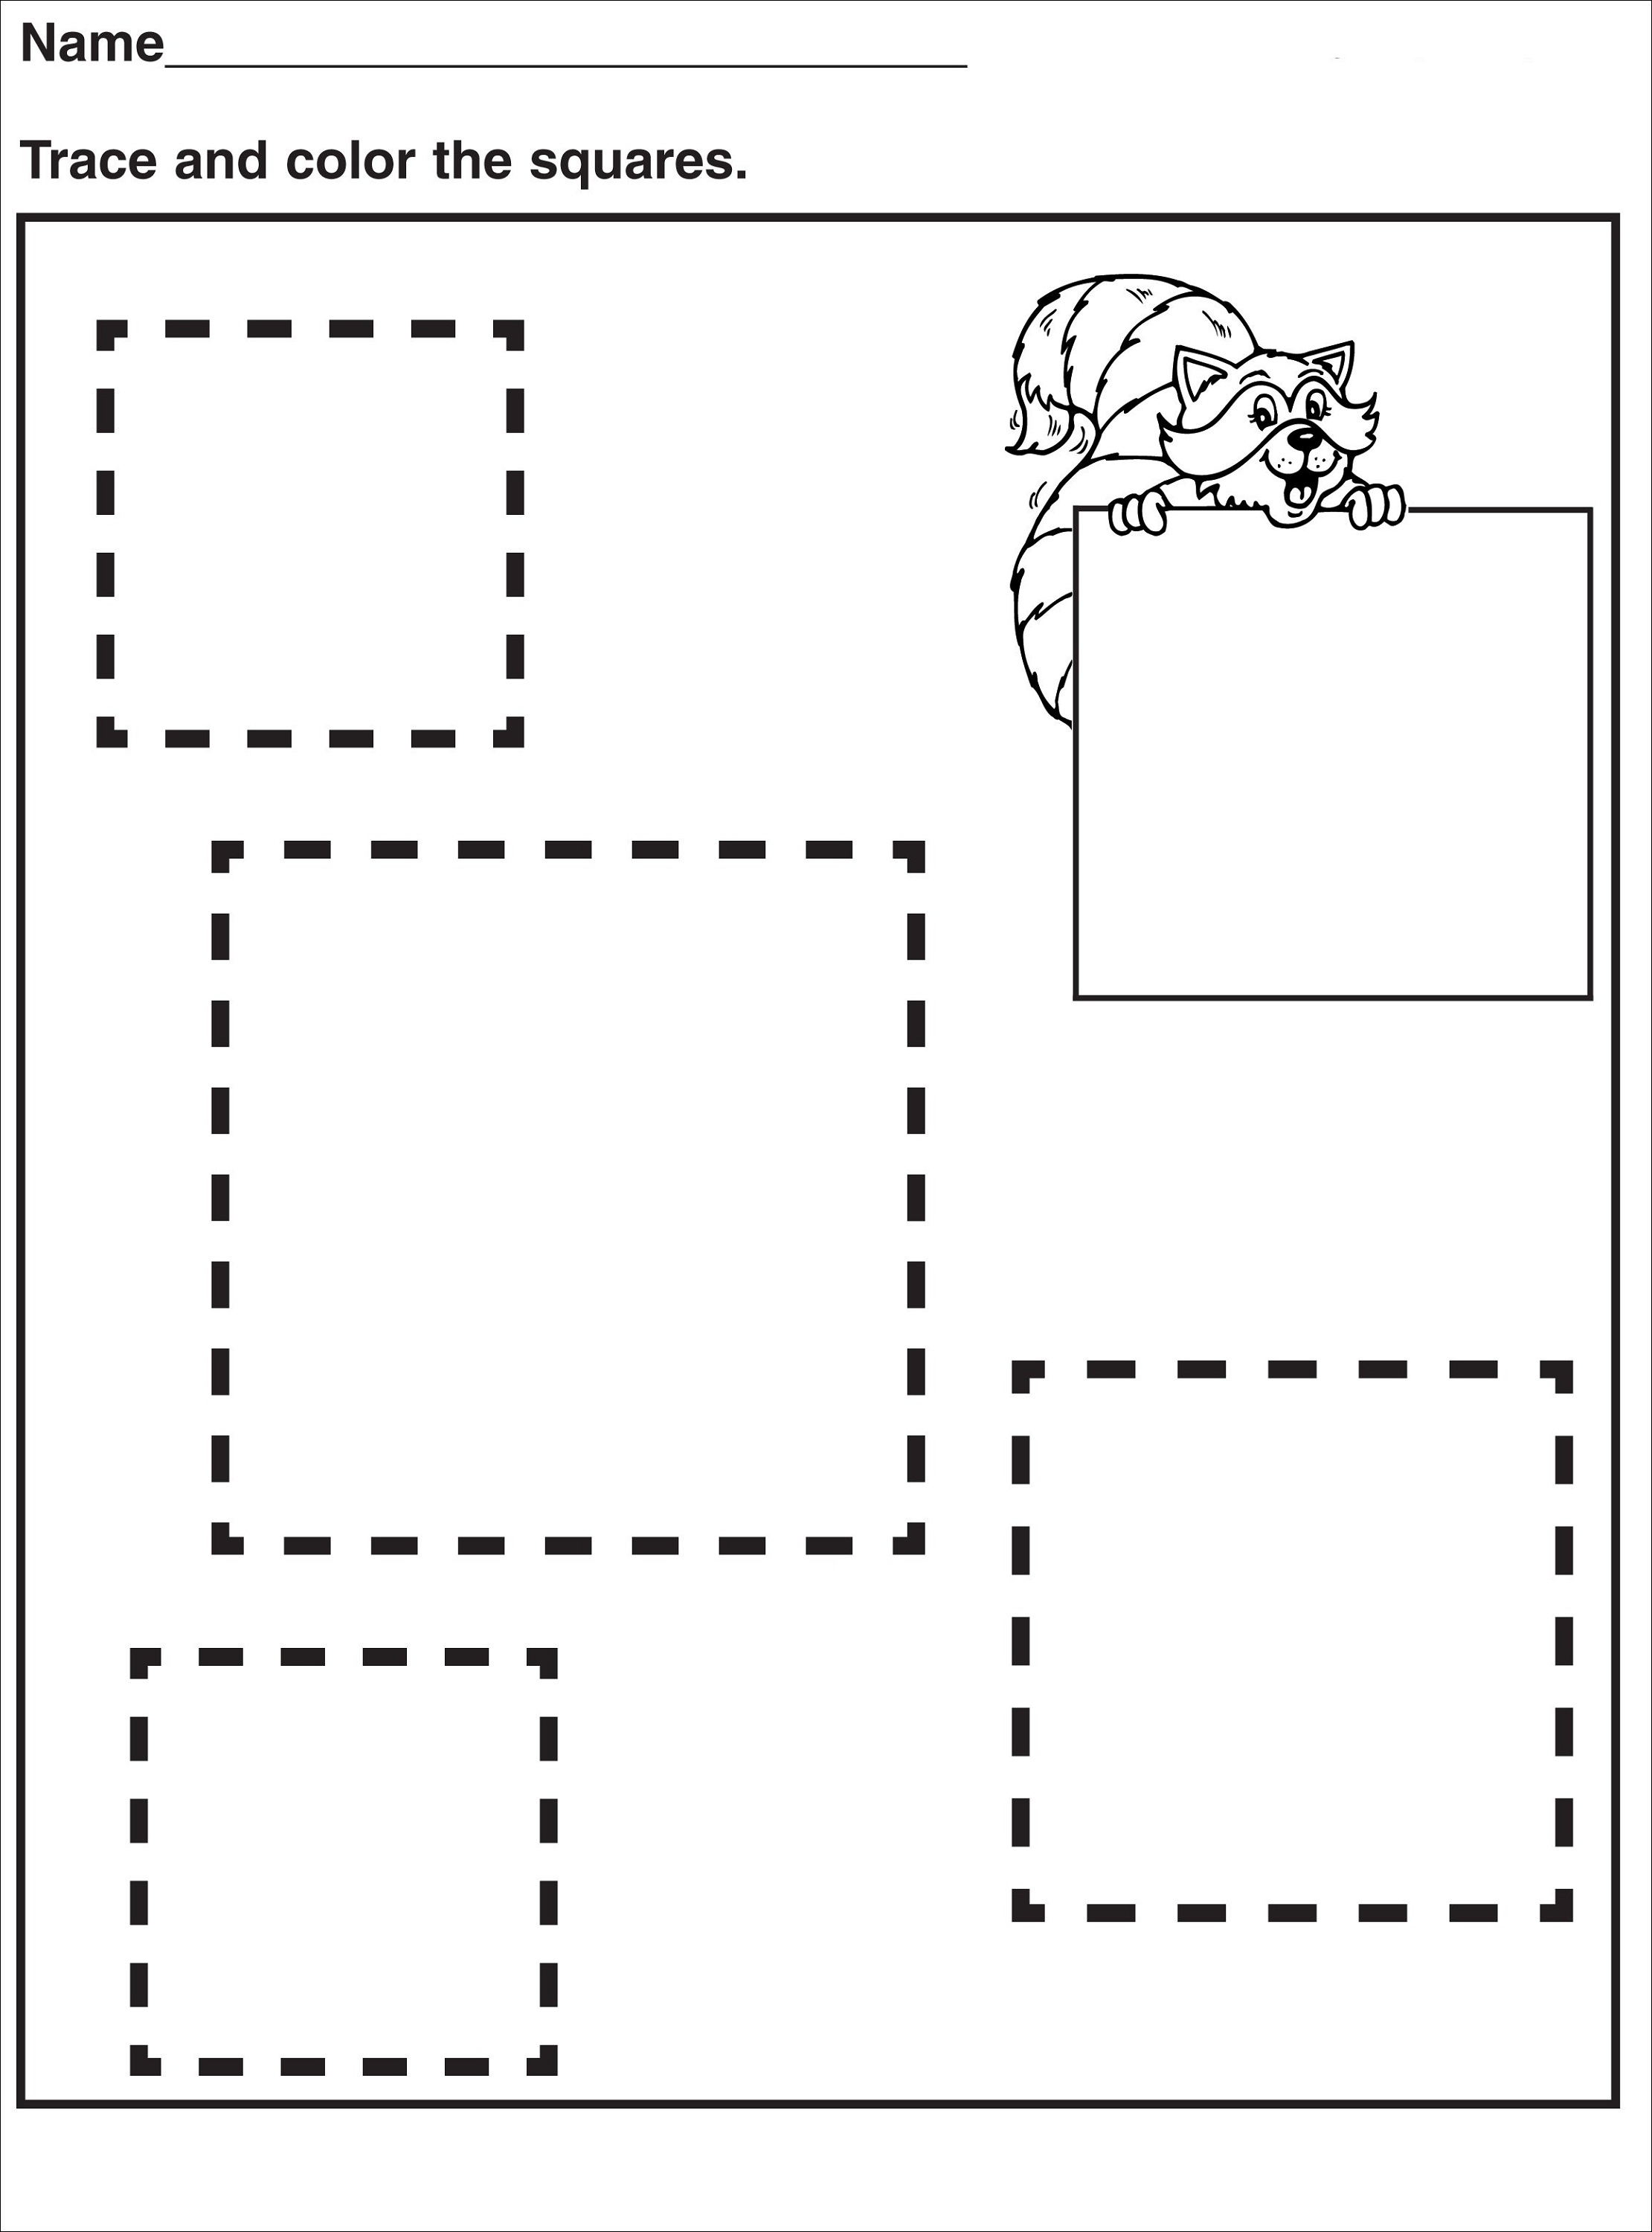 Download Tracing Pages for Preschool | Activity Shelter